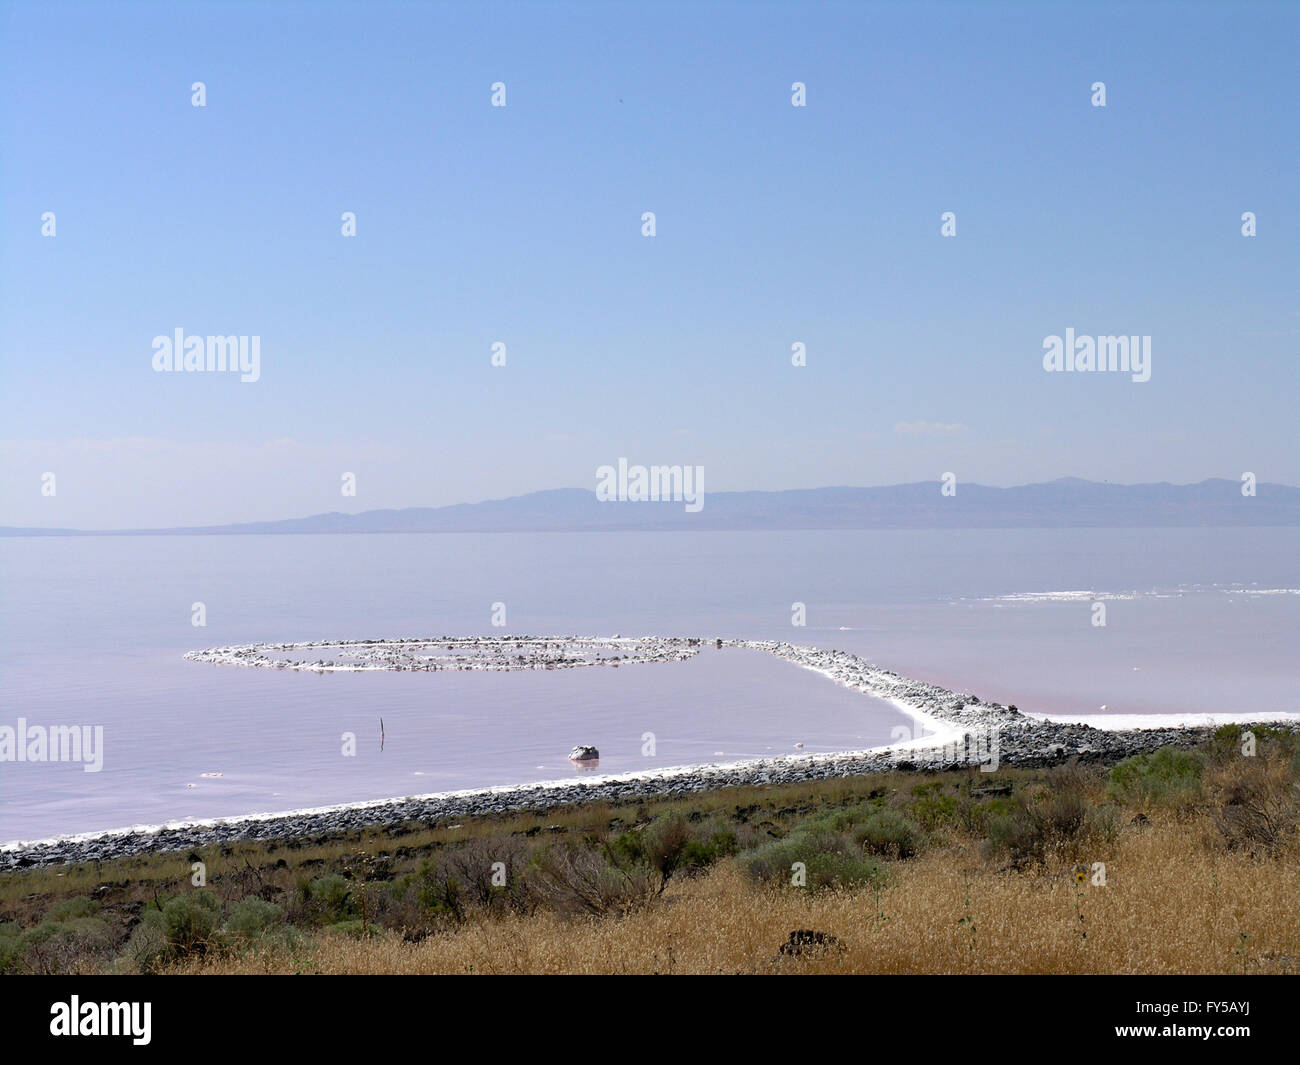 SALT LAKE, UTAH - AUGUST 25: view of Spiral Jetty swirls in the water, Robert Smithson's masterpiece earthwork, on the north sid Stock Photo